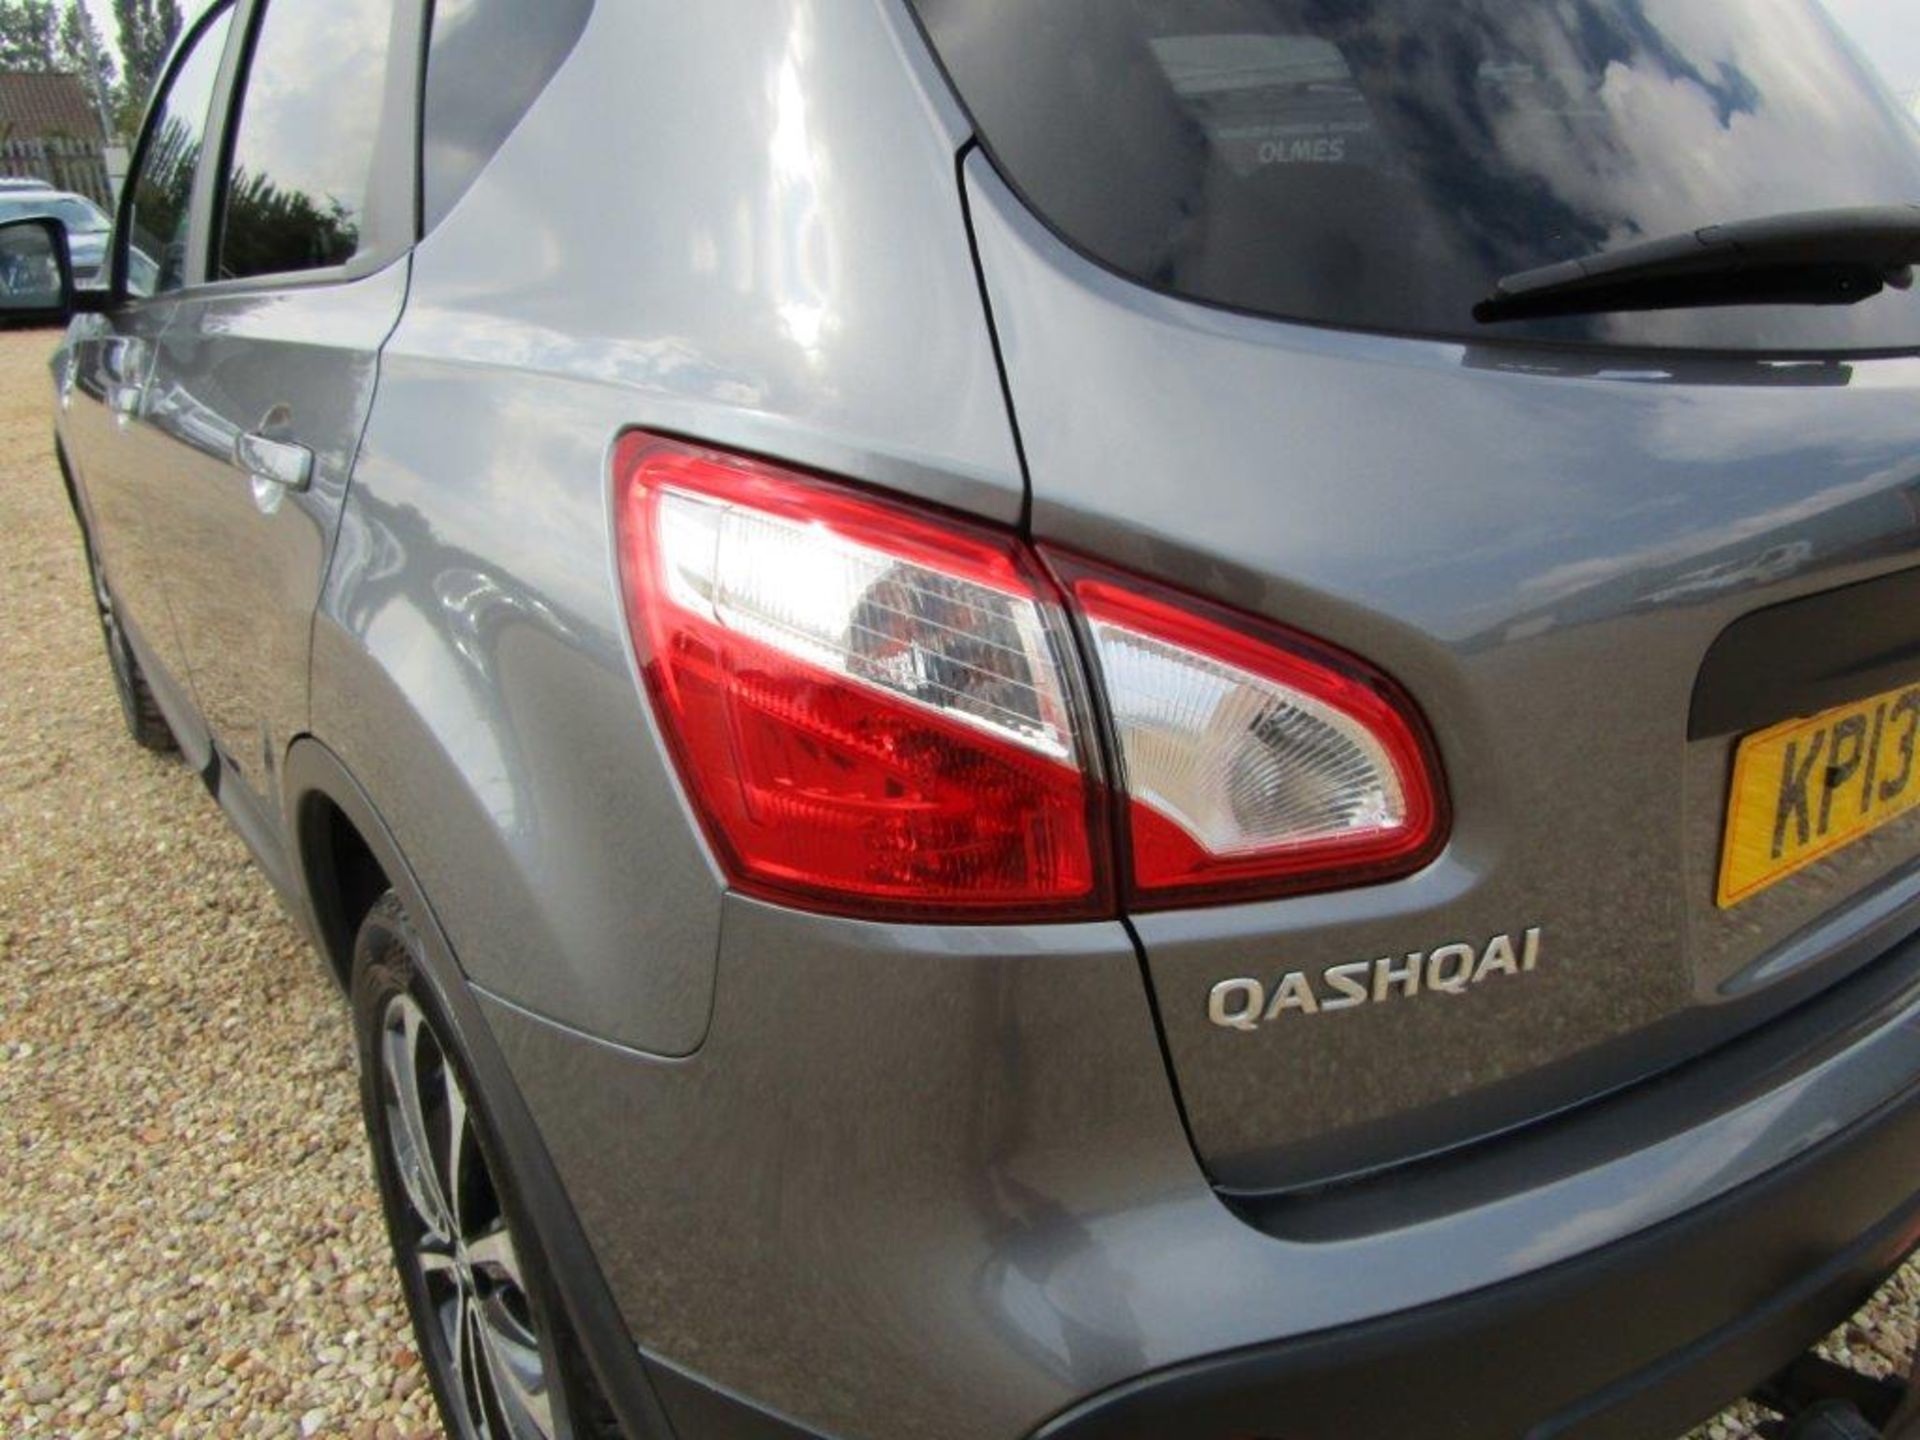 13 13 Nissan Qashqai 360 iS DCi - Image 19 of 27